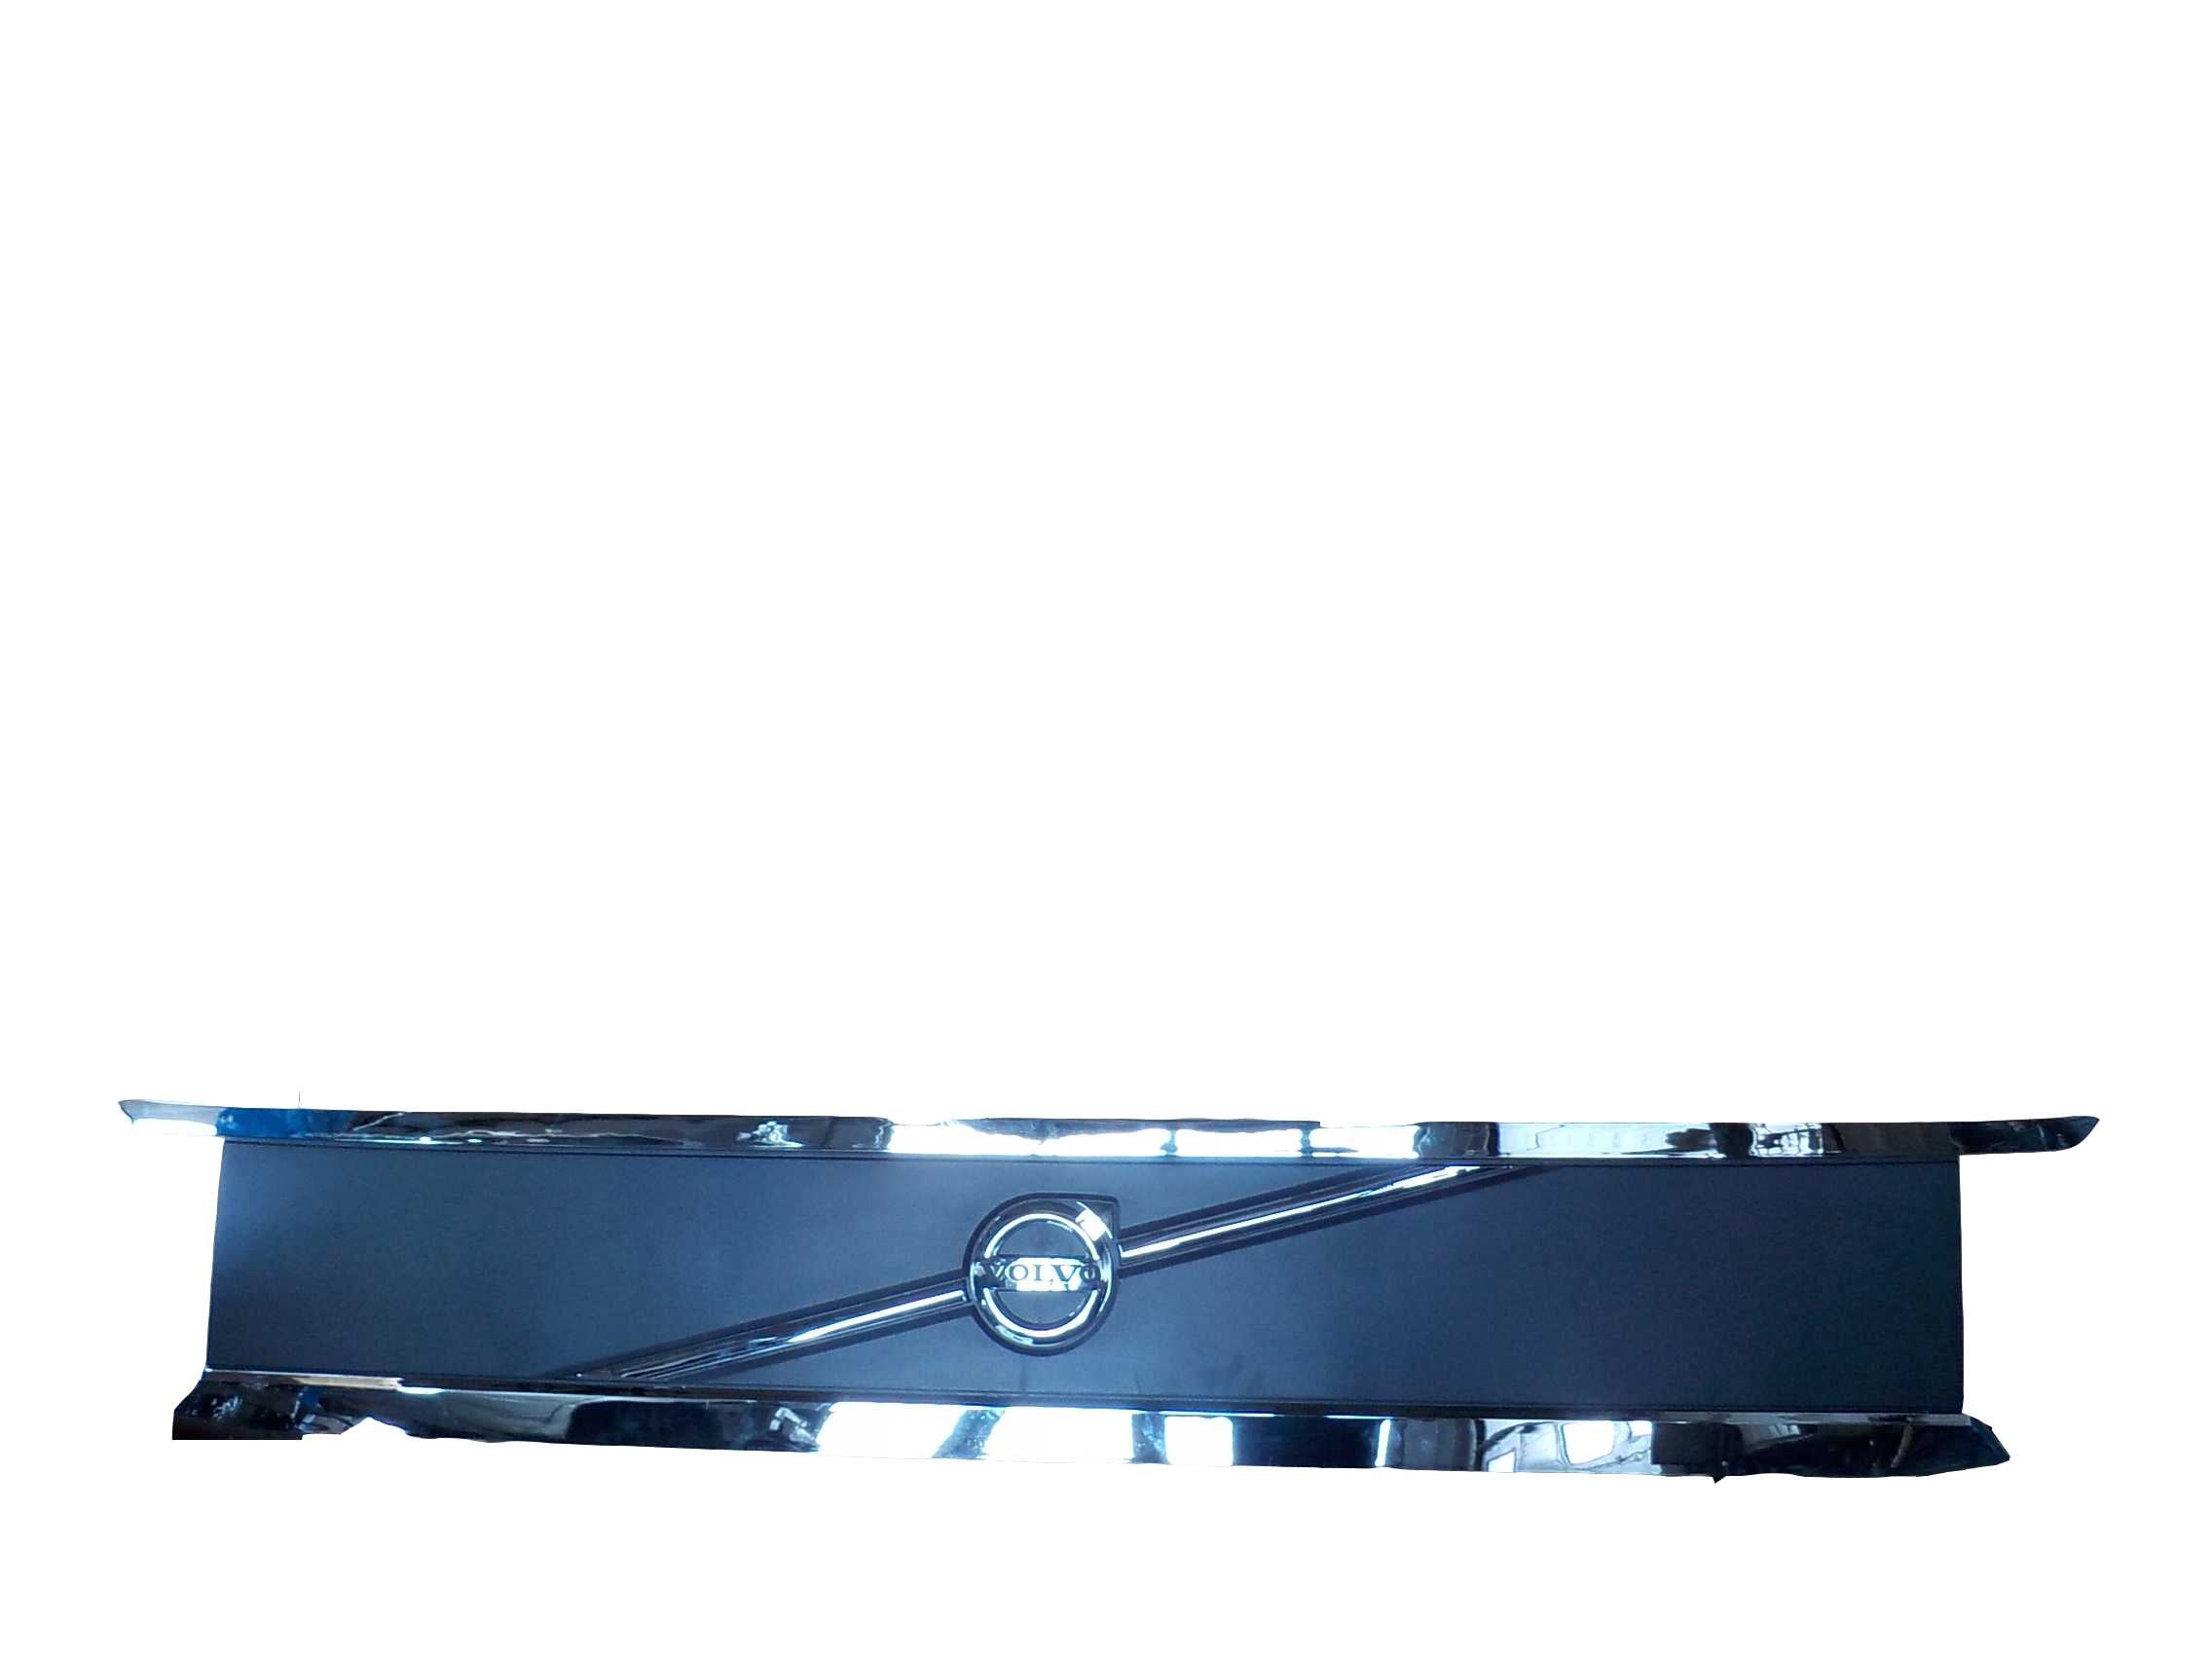 Fanchants 84027588 Front panel For Volvo FH/FM/FMX/NH 9/10/11/12 